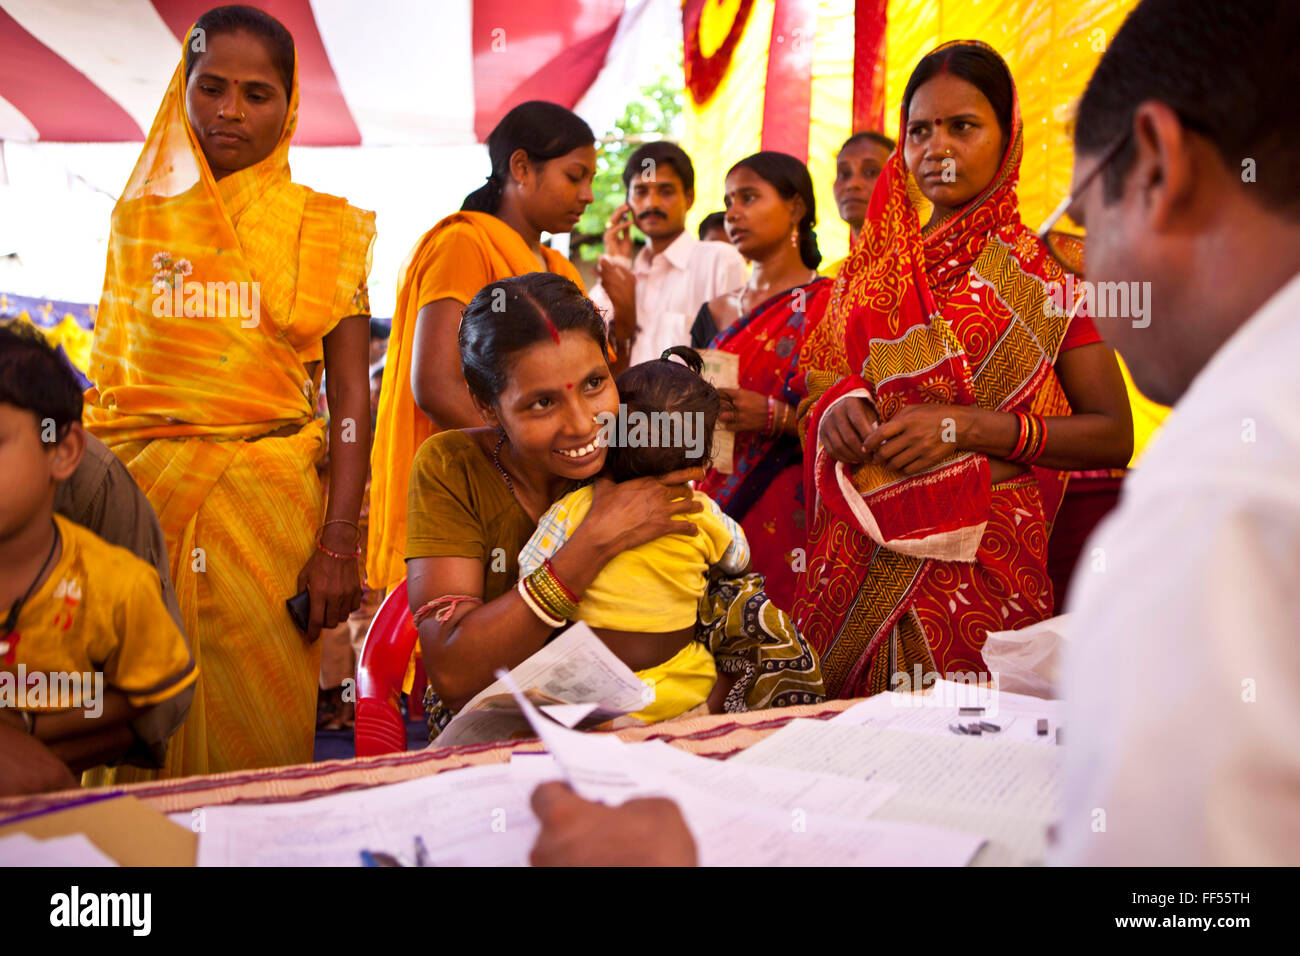 Families from the Dobhanda Nagar slum in Cuttack get legal advice and birth certificates from the Urban Law centre run by the organisation CLAP, Committee for Legal Aid to Poor, helps provide legal aid to the poorer communities in the Orissa district of India. Stock Photo